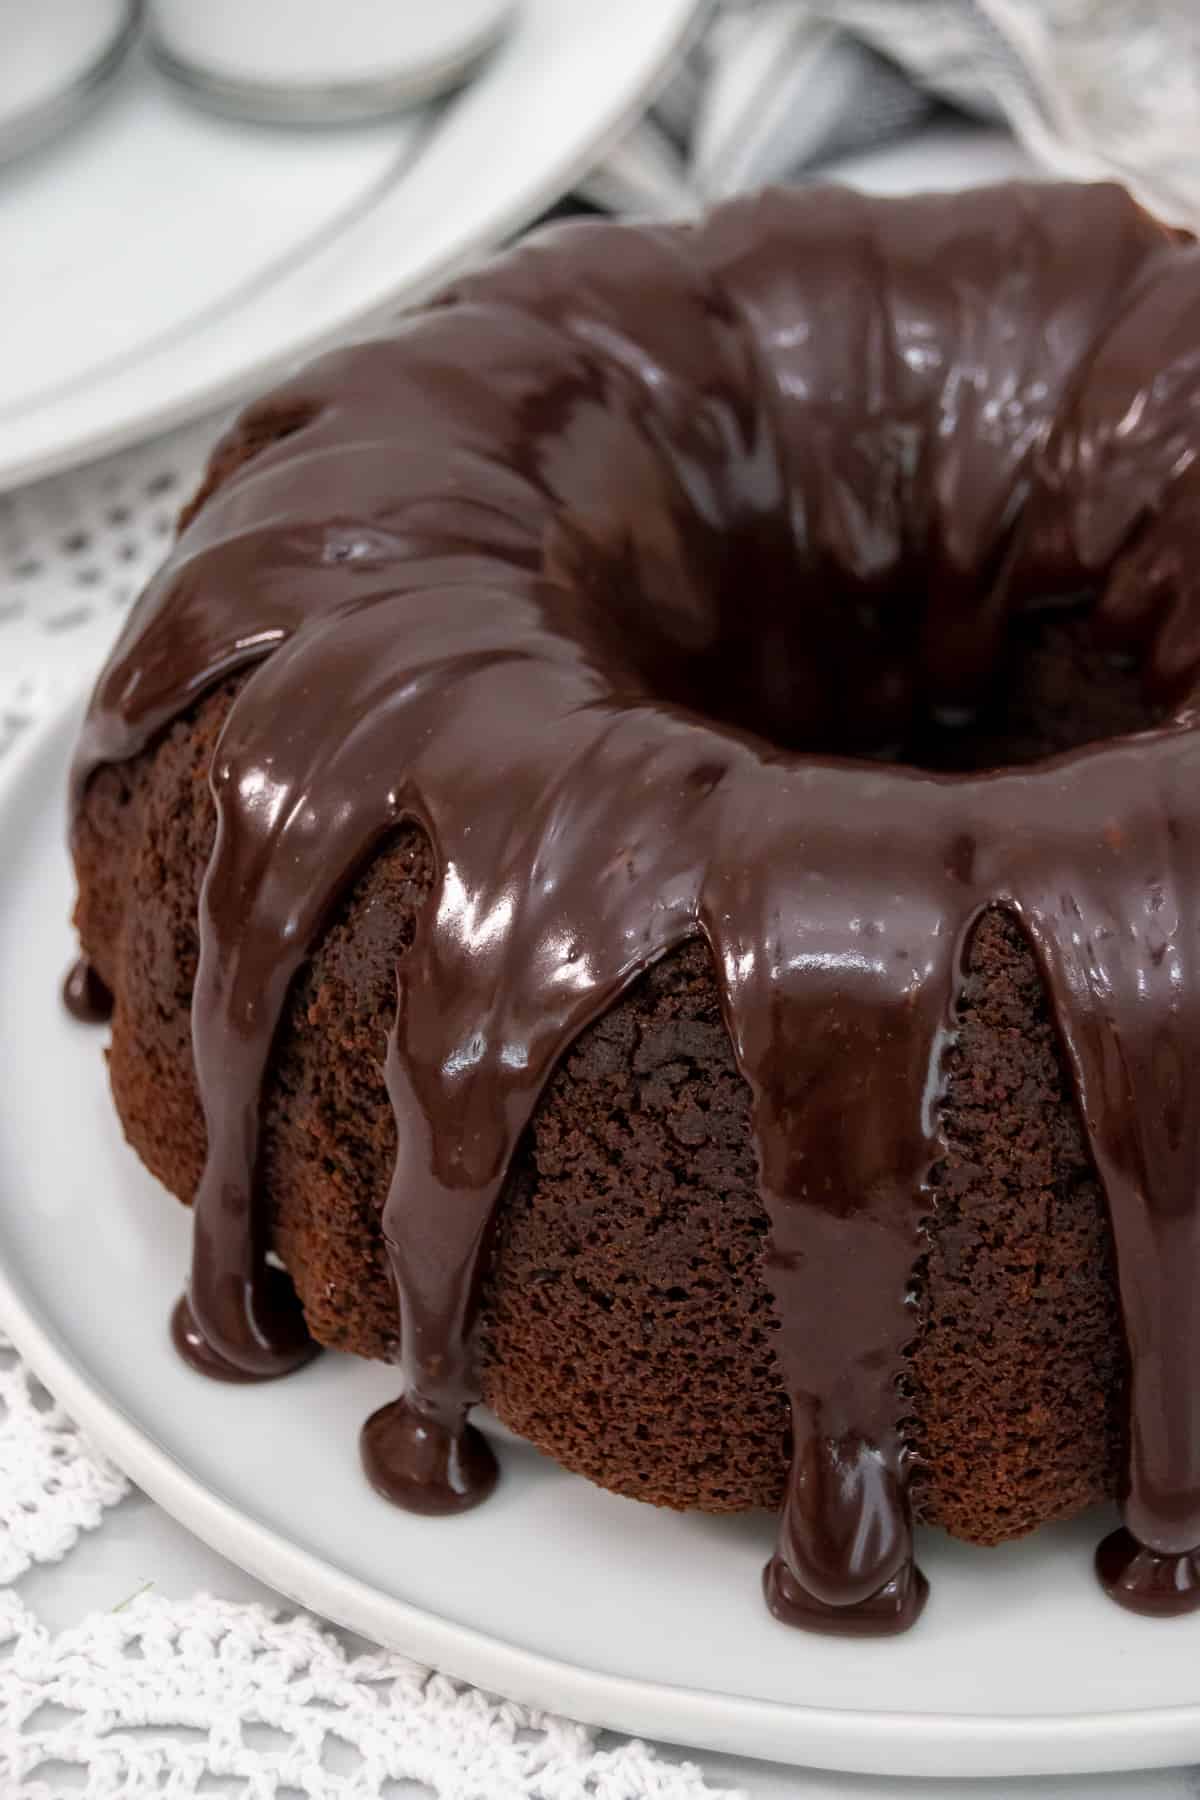 Close up side view of chocolate sour cream cake with chocolate glaze dripping down the side.